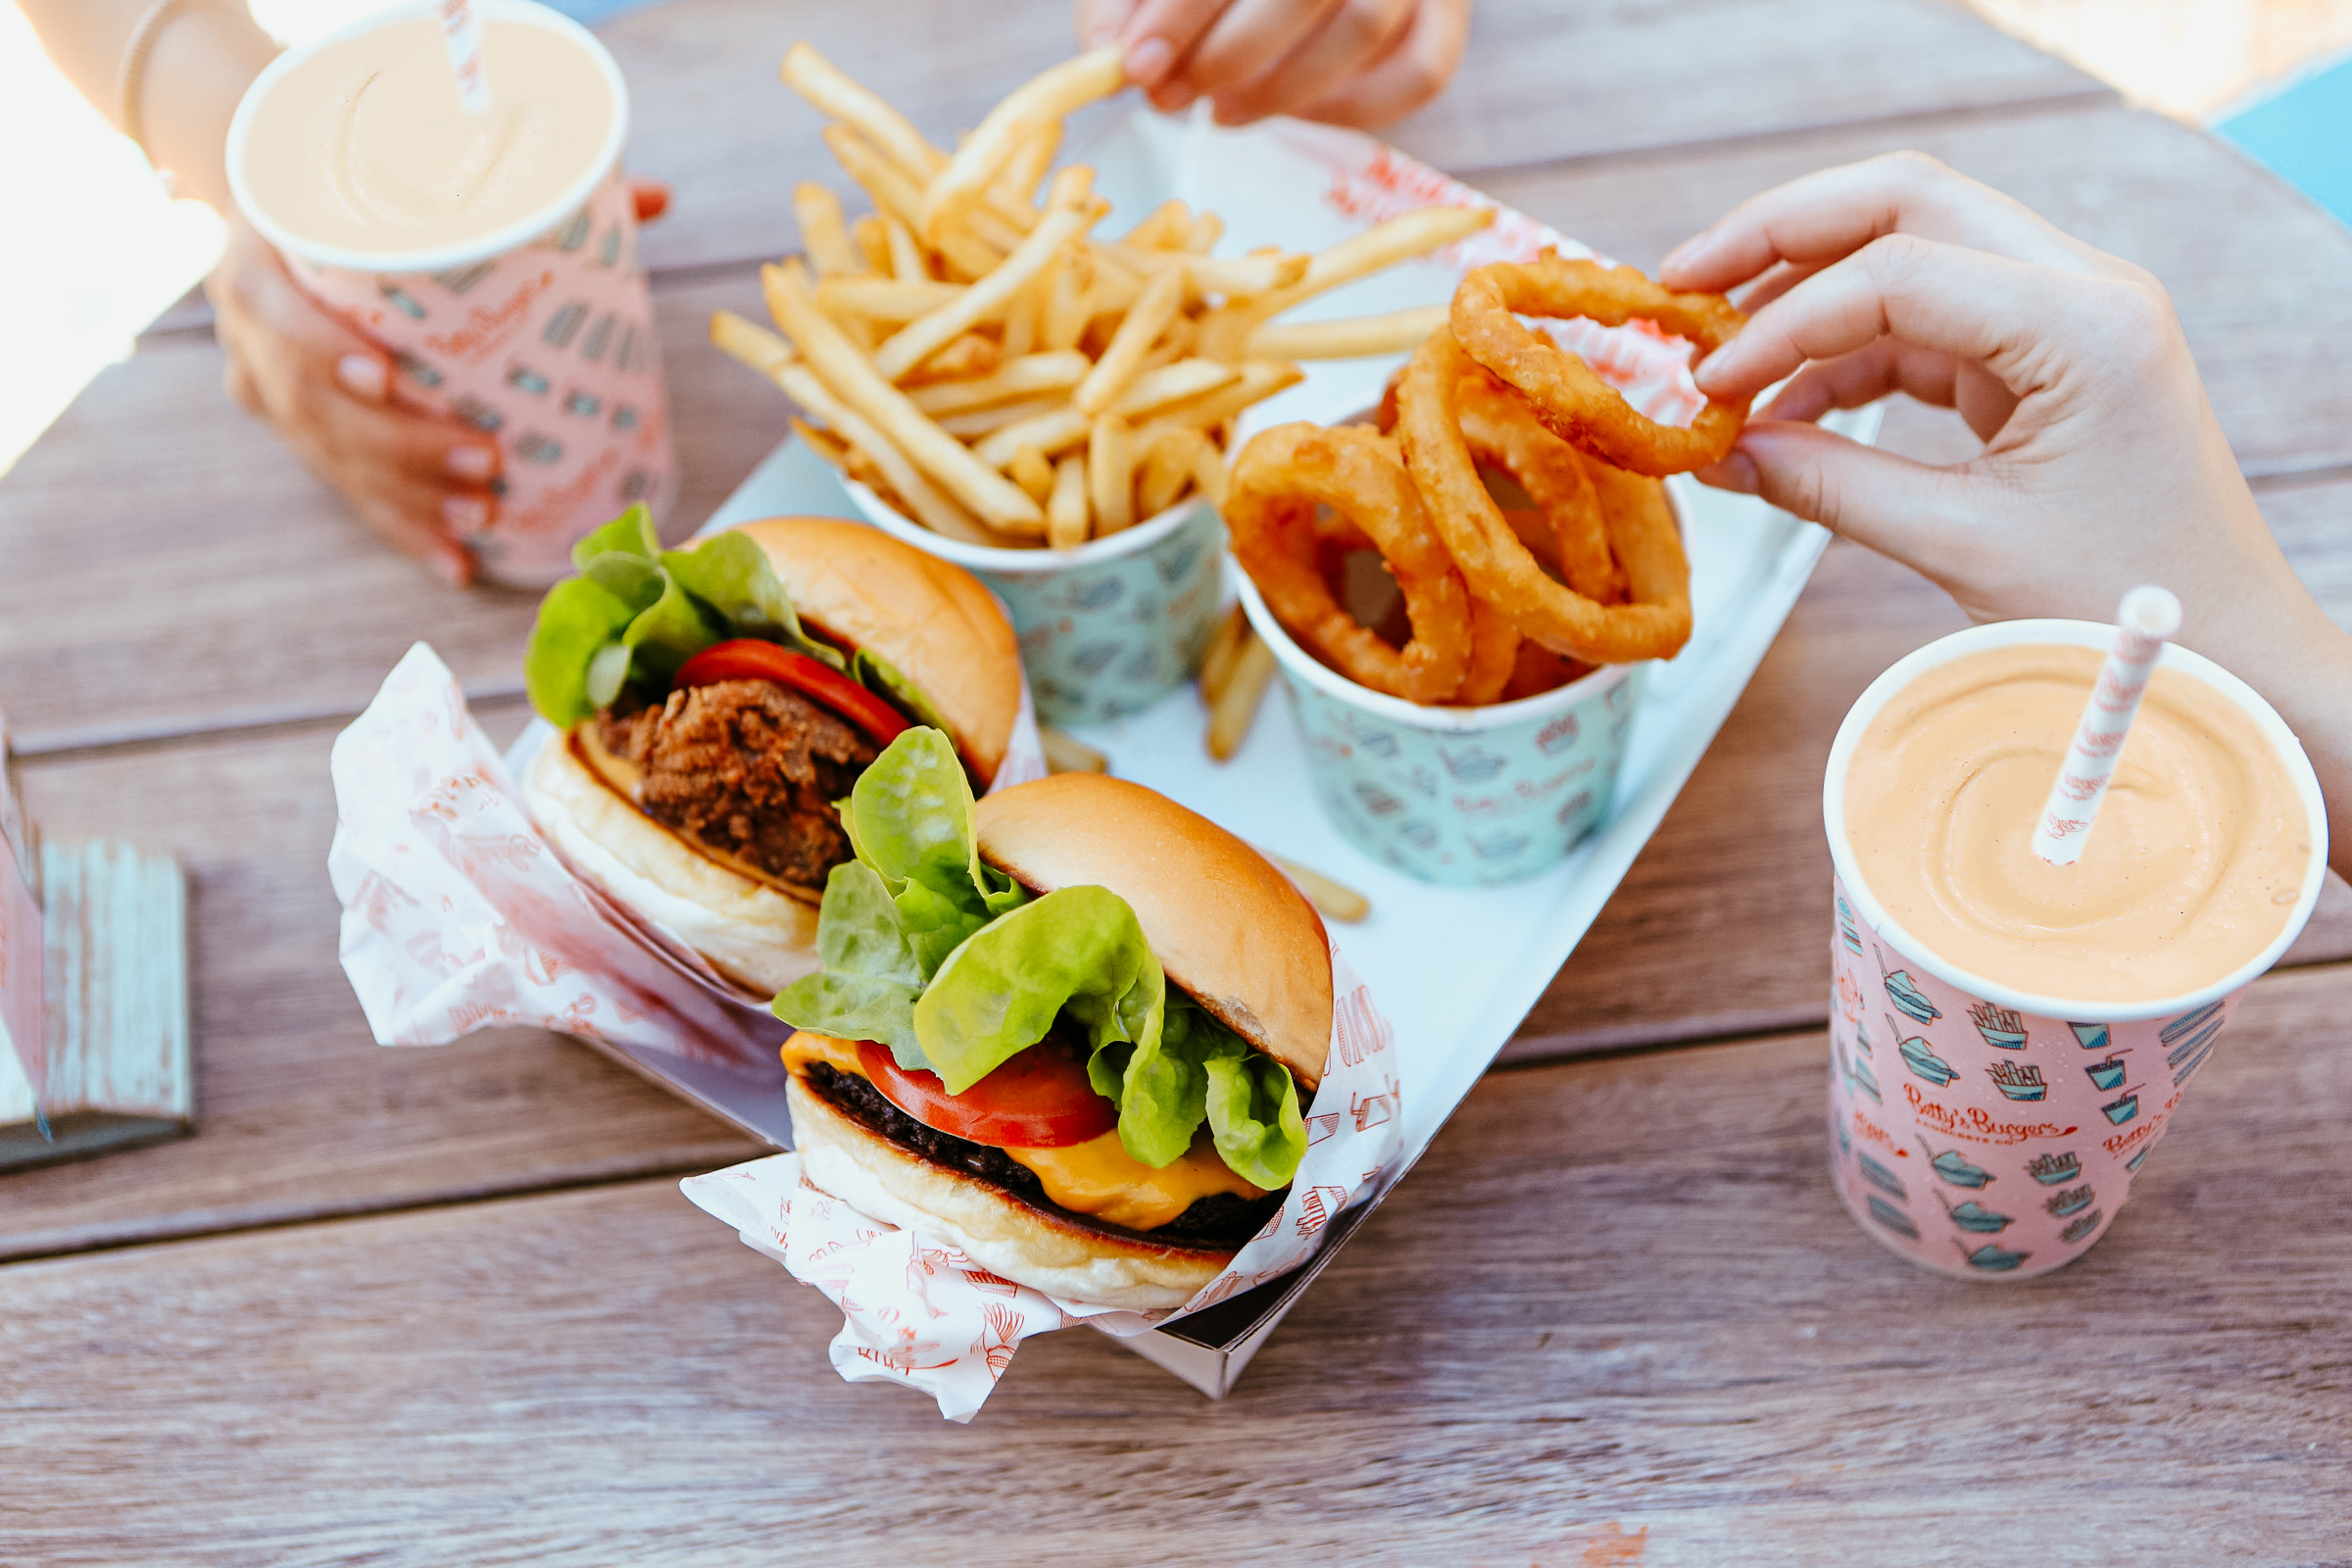 WIN burgers and shakes all round at Betty’s Burgers for four people!